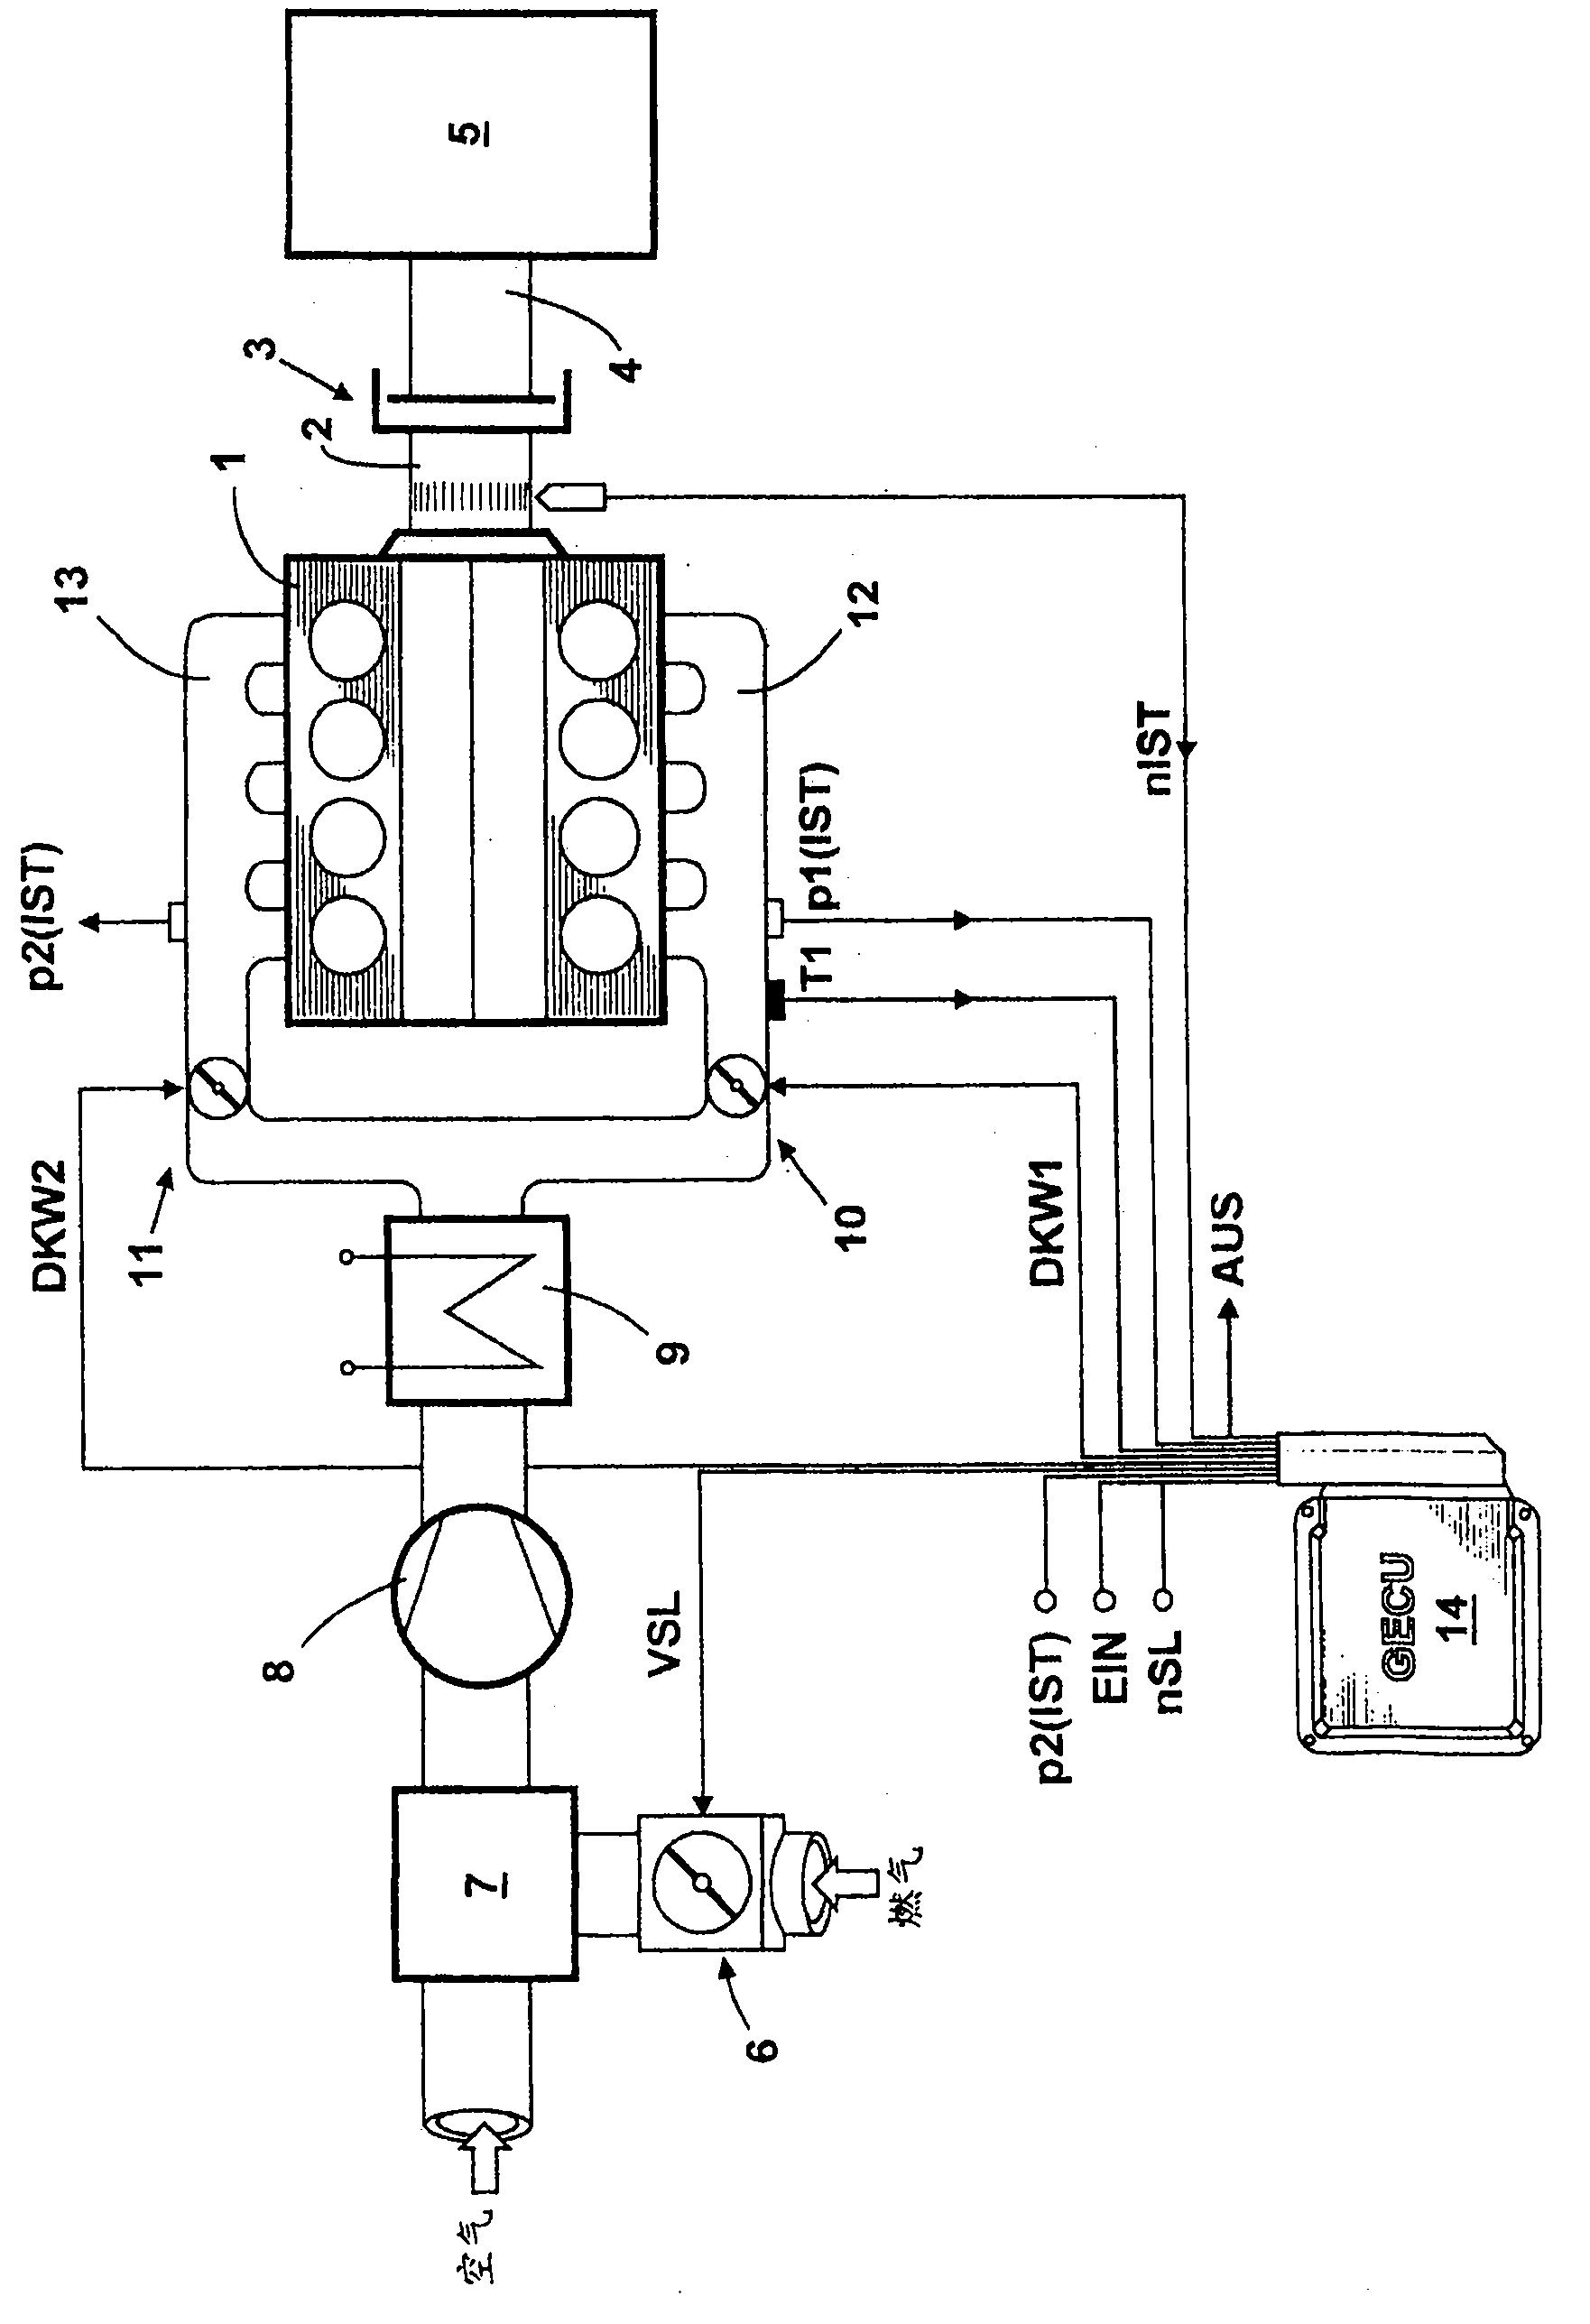 Method for controlling a stationary gas motor